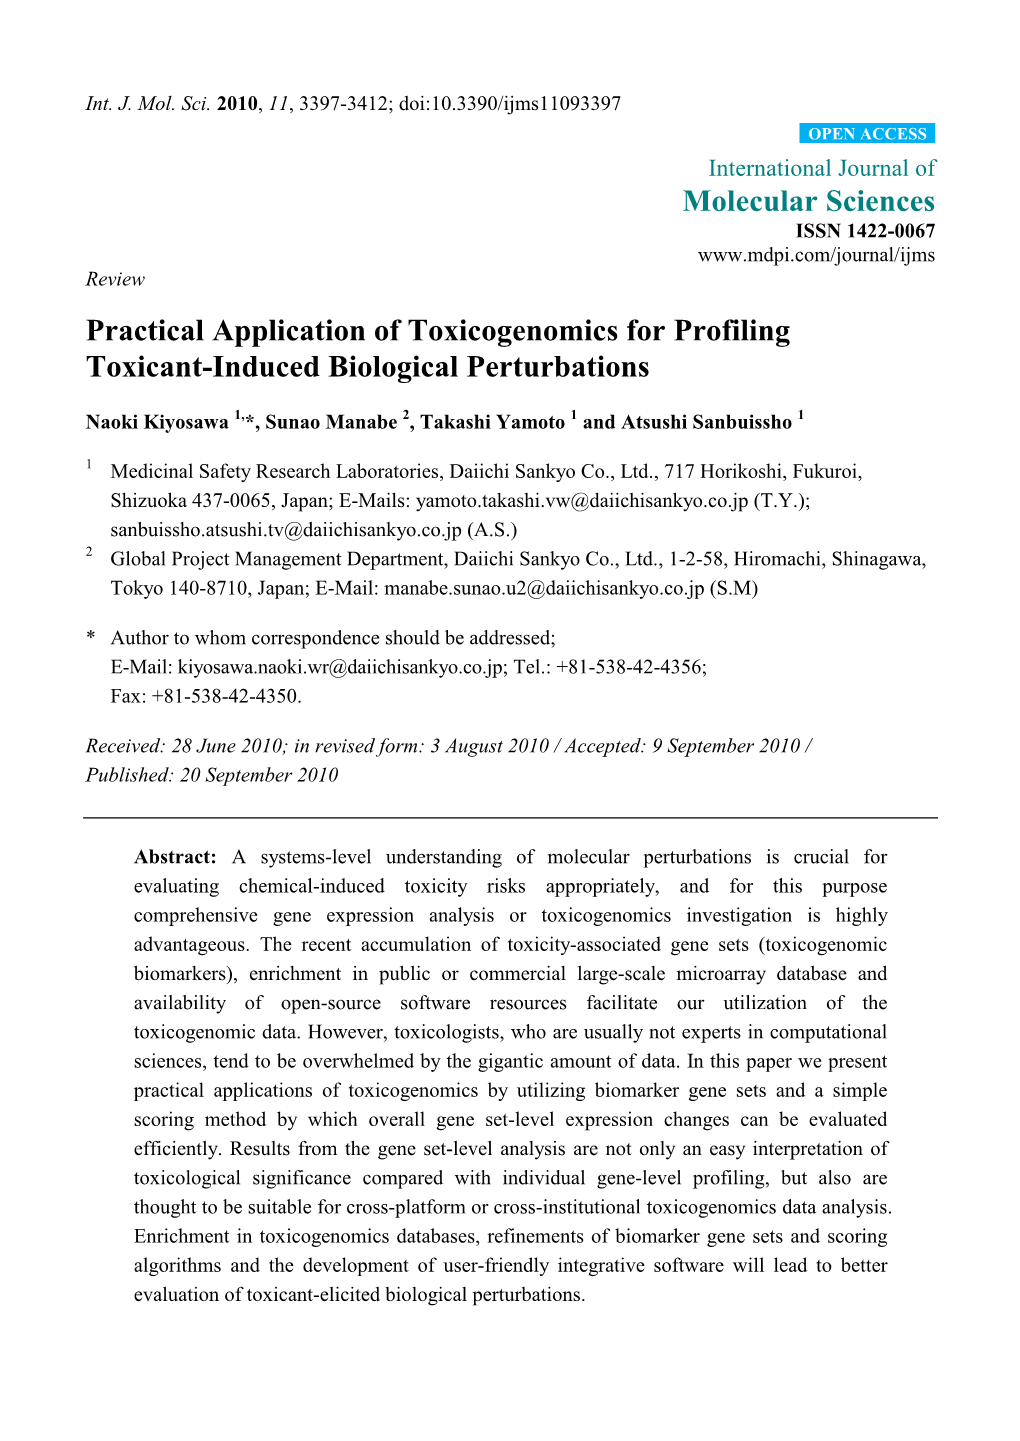 Practical Application of Toxicogenomics for Profiling Toxicant-Induced Biological Perturbations